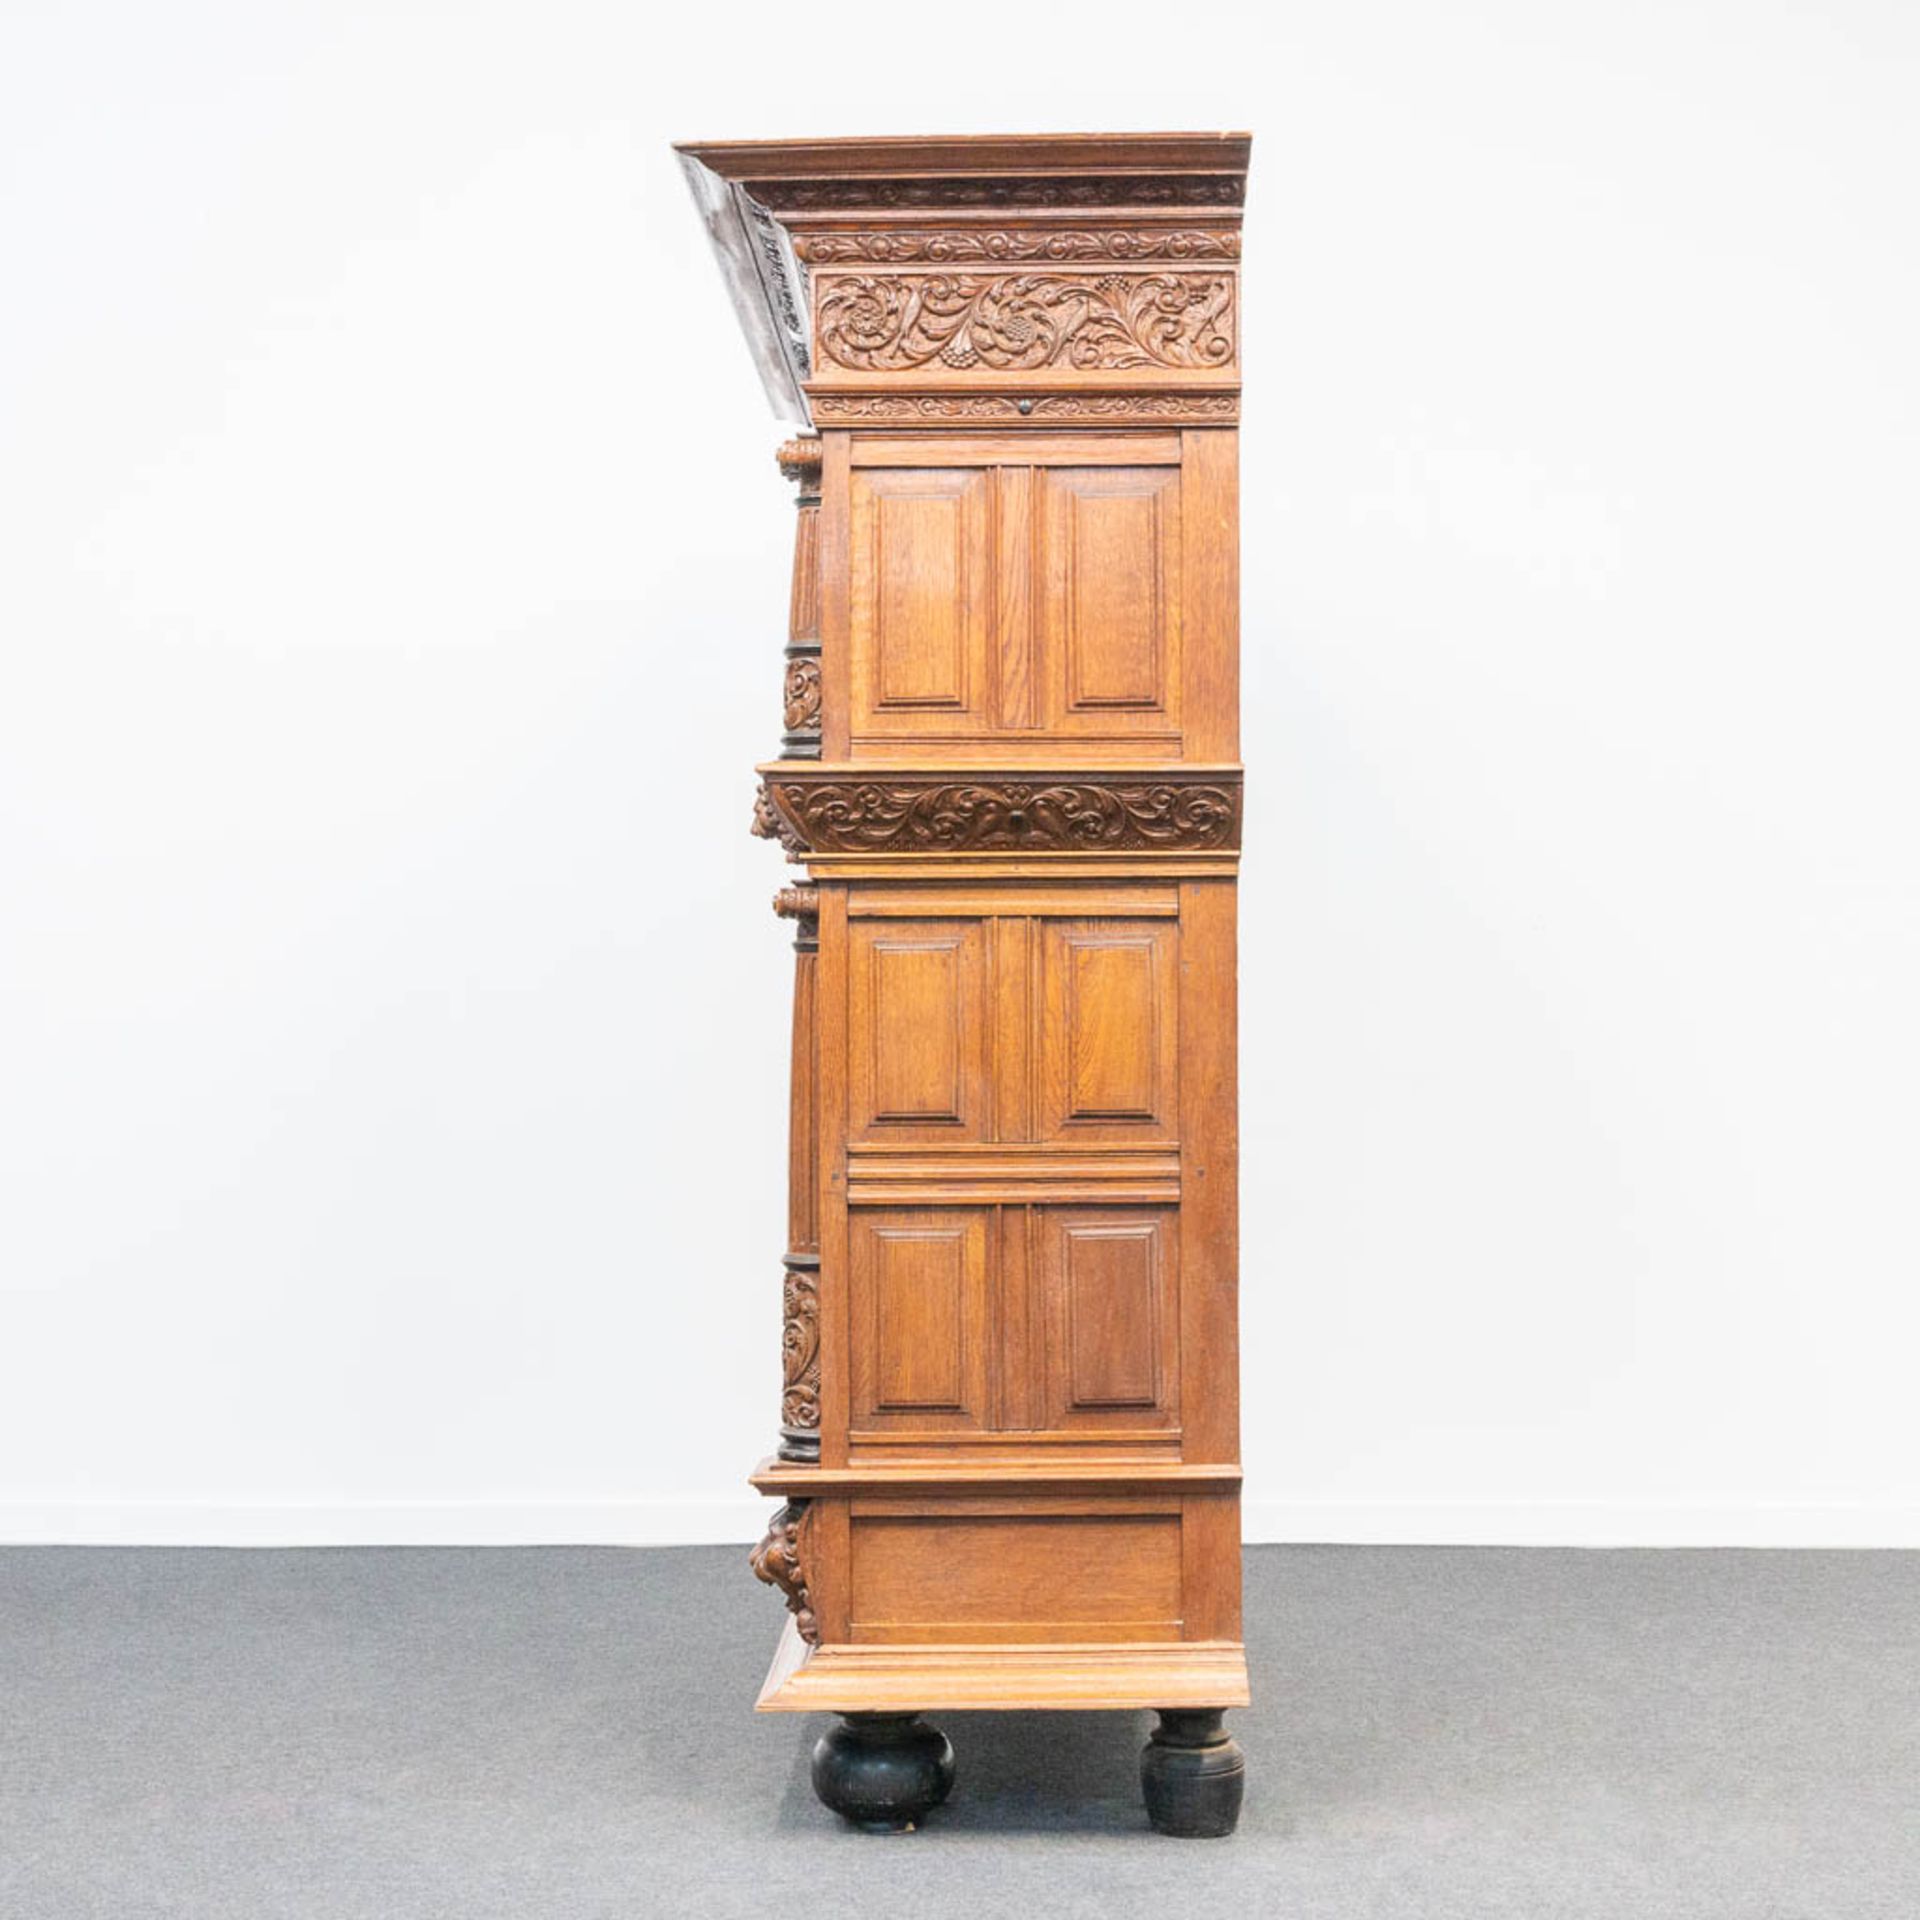 A cabinet, made in Flemish renaissance style, oak with fine sculptures, 19th century. - Image 2 of 27